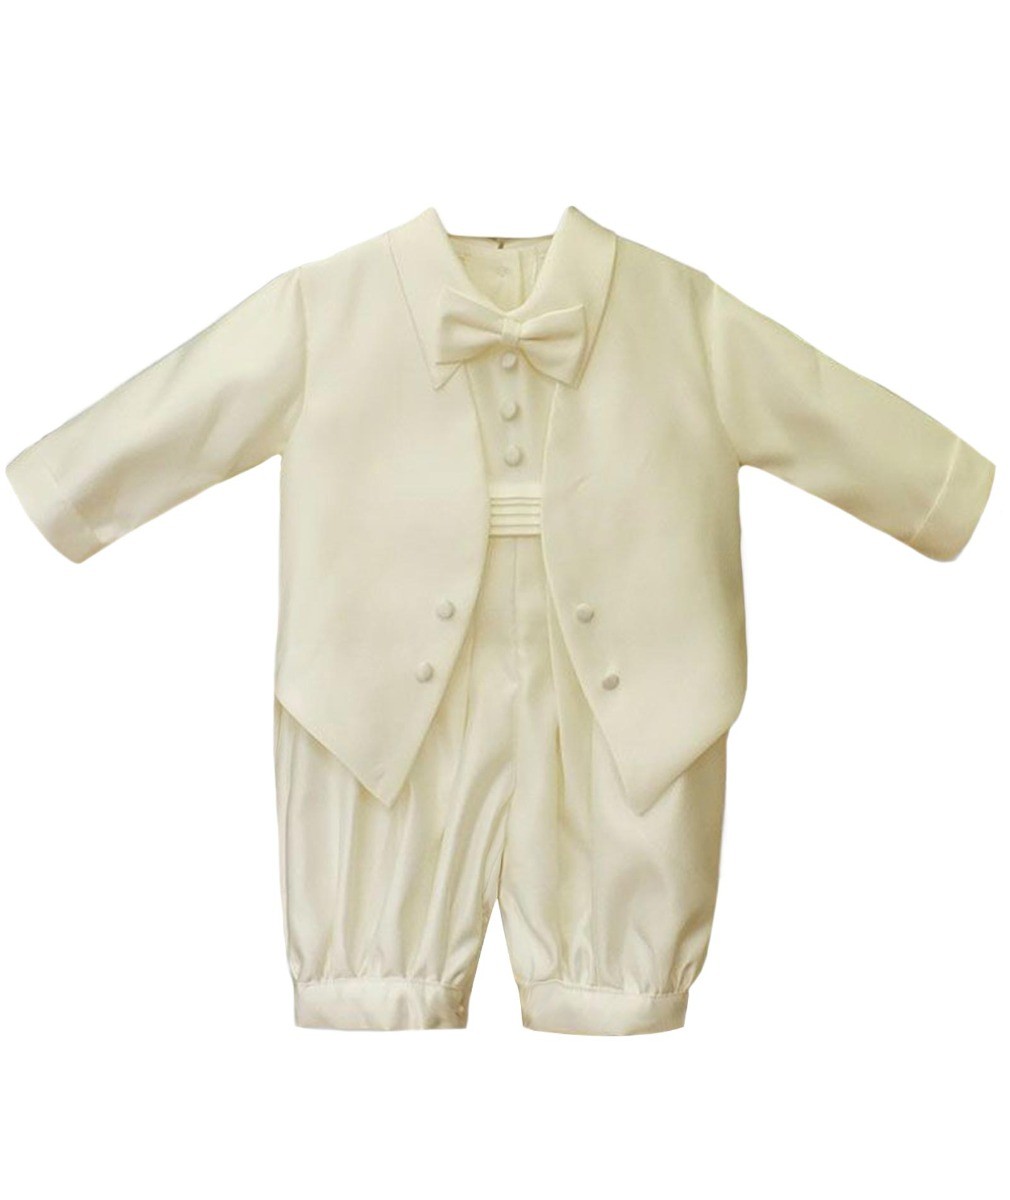 Baby Boys All In One Christening Suit